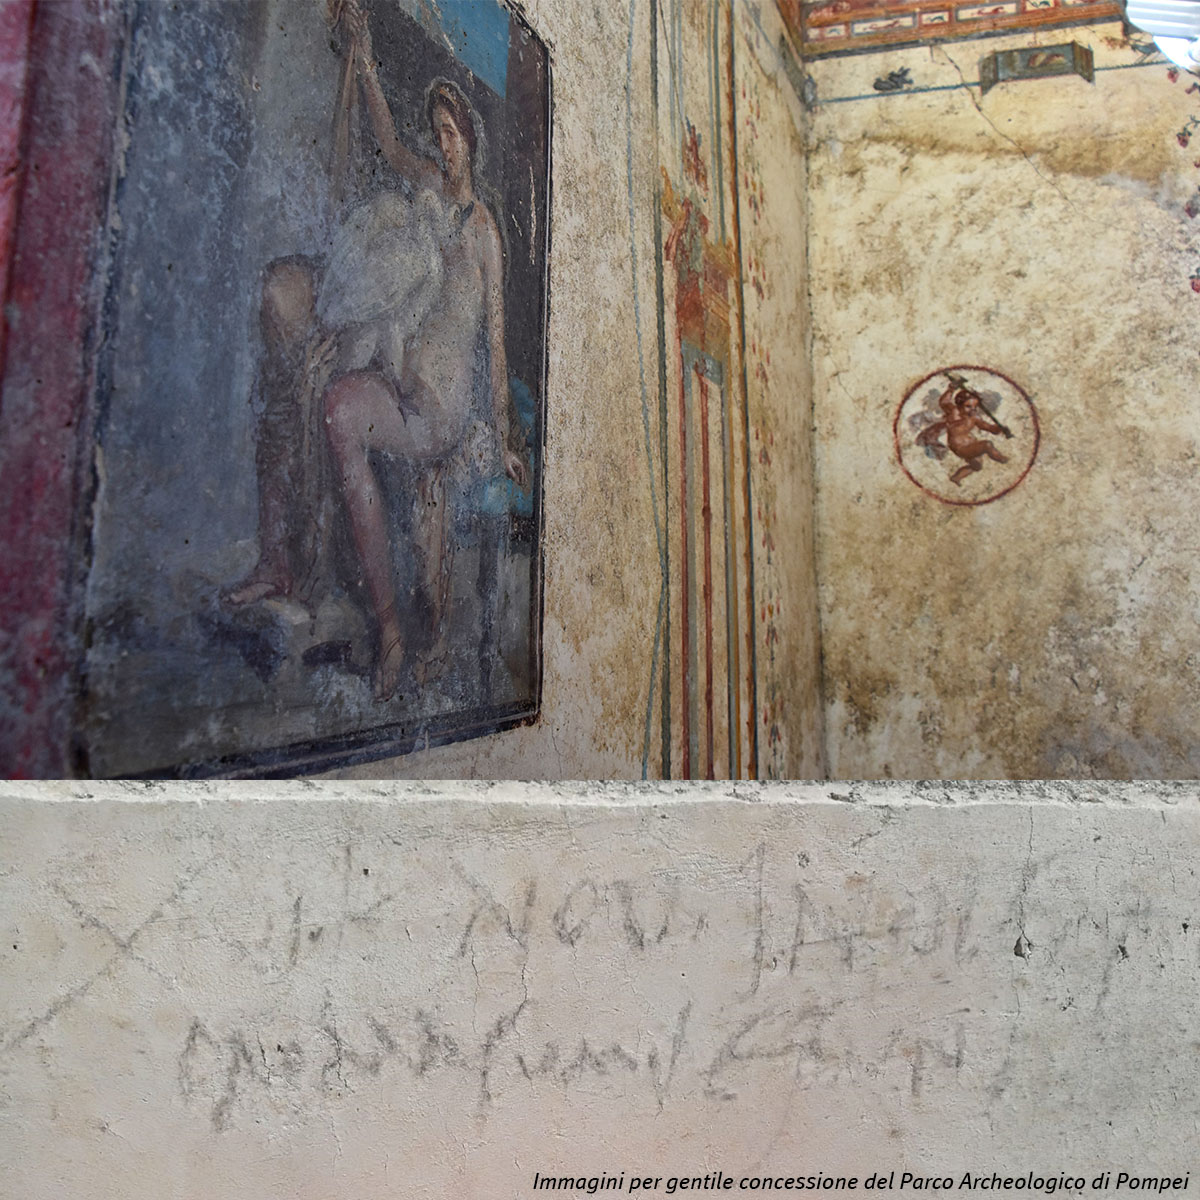 Italy: the inscripition and villas discovered in Pompeii 